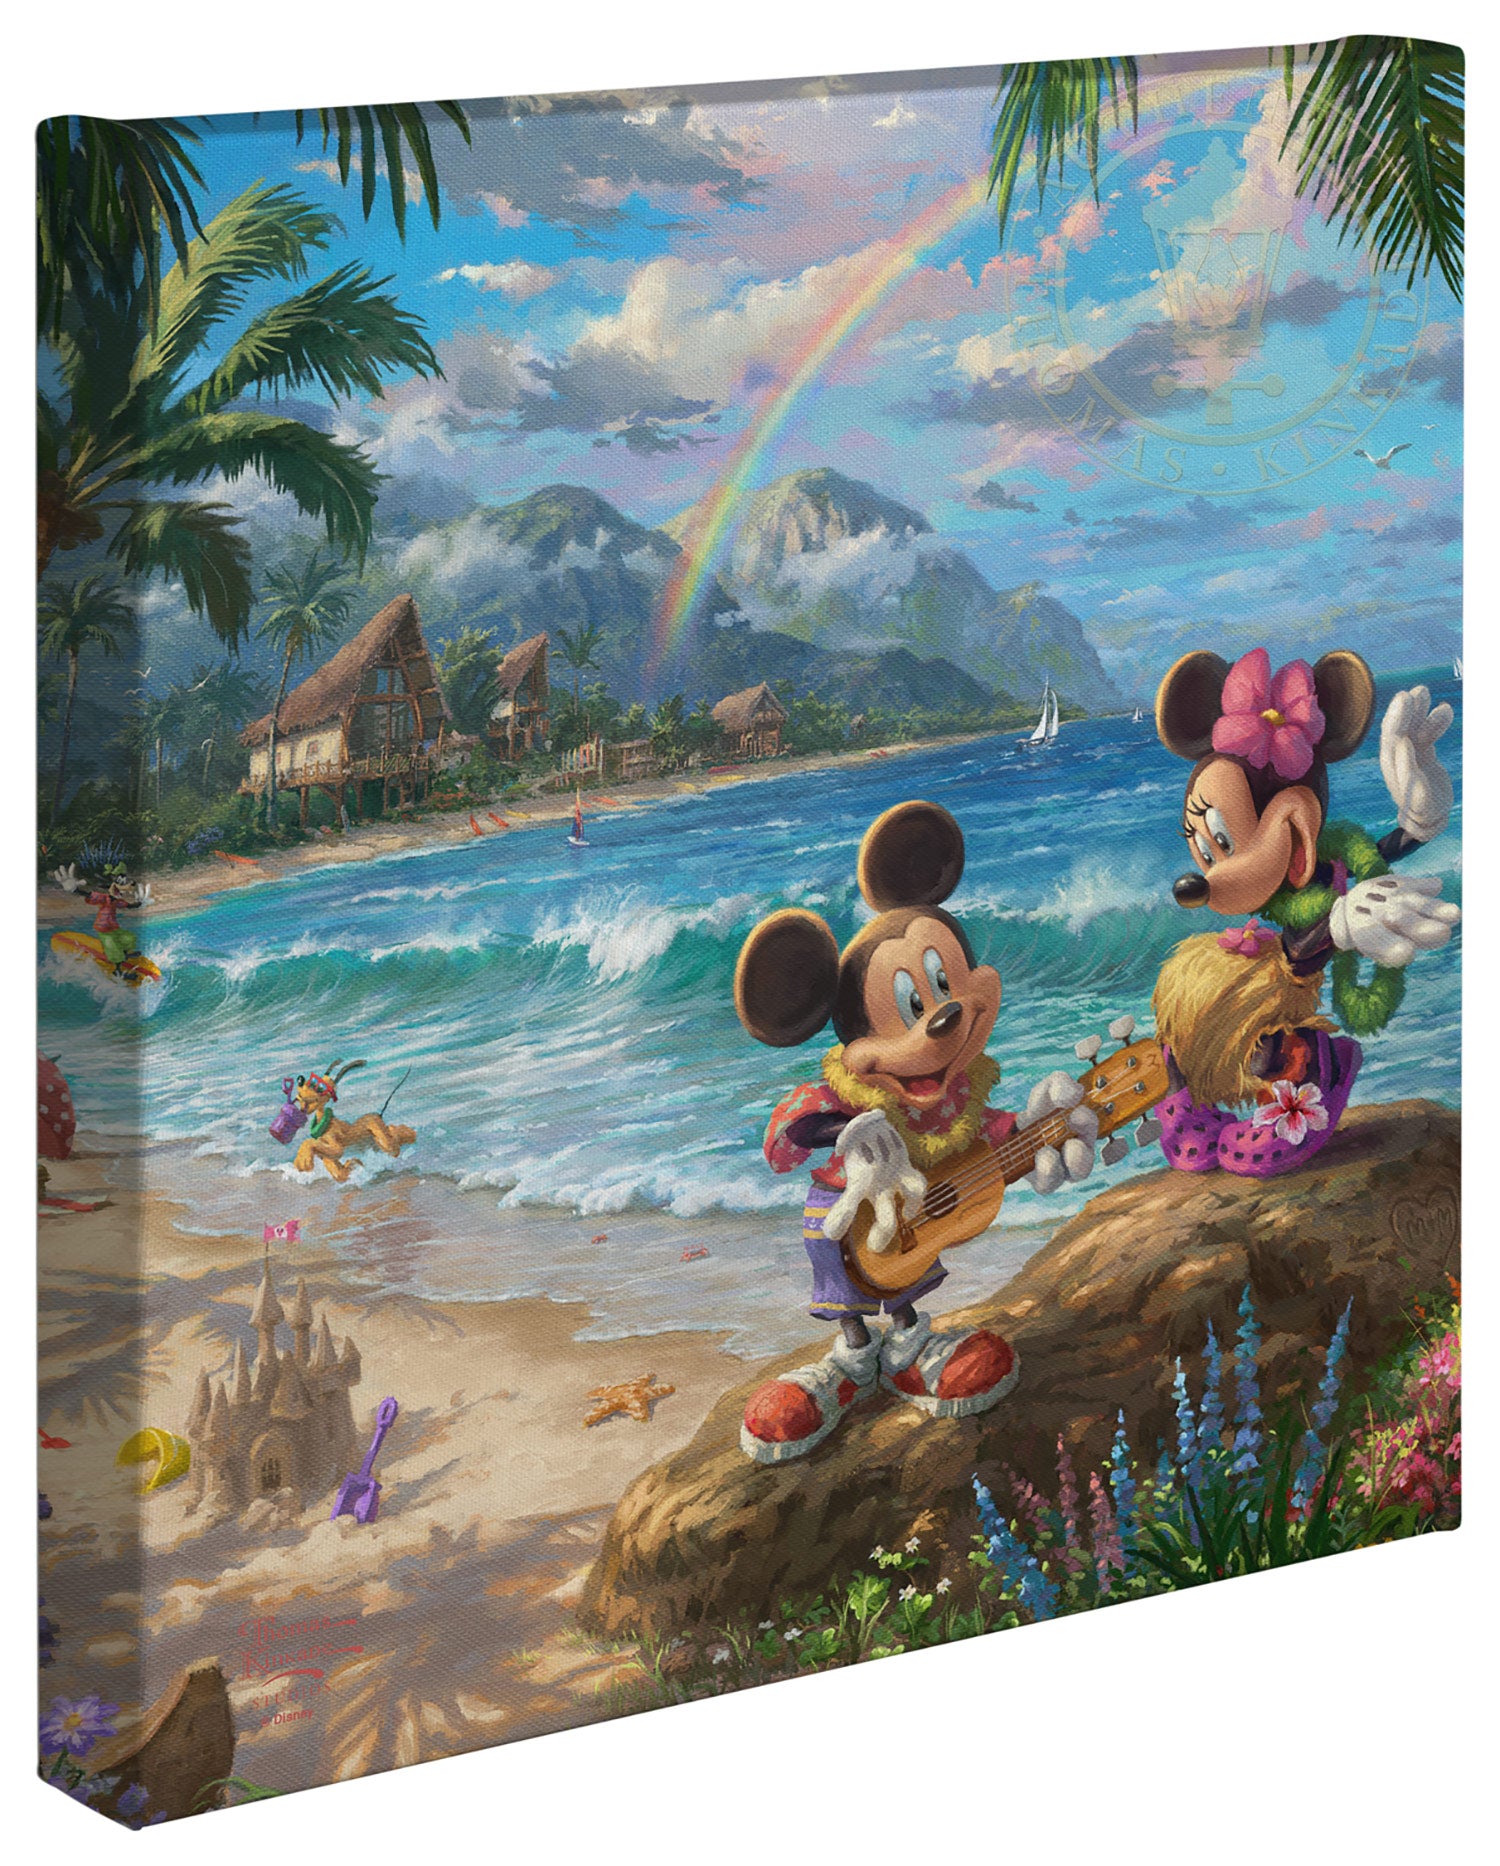 Thomas Kinkade Studios "Mickey and Minnie in Hawaii" Limited and Open Canvas Giclee